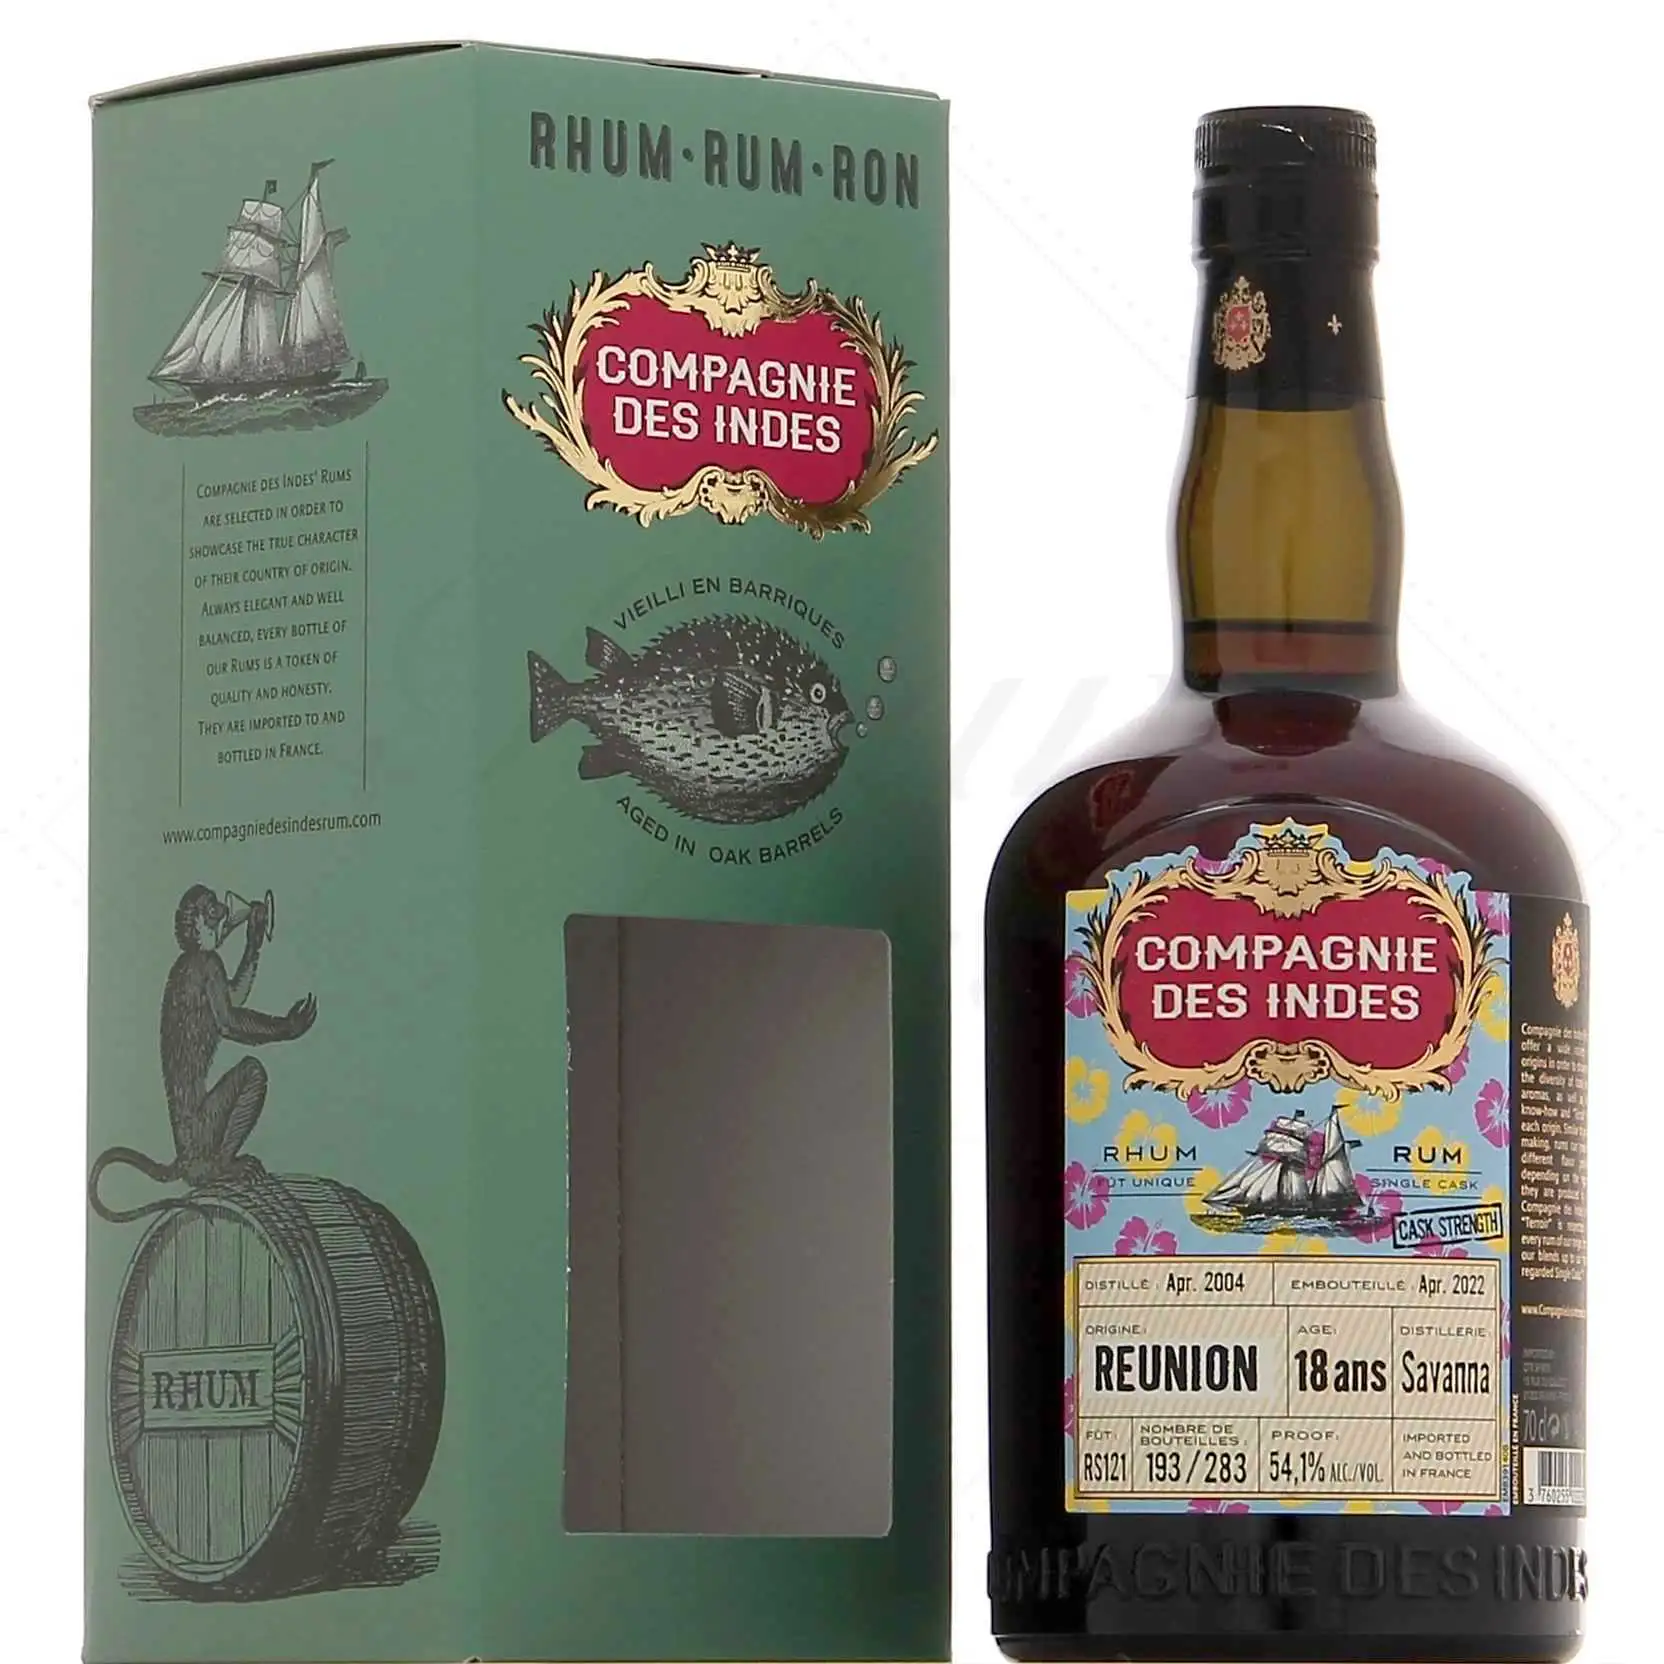 Image of the front of the bottle of the rum Reunion